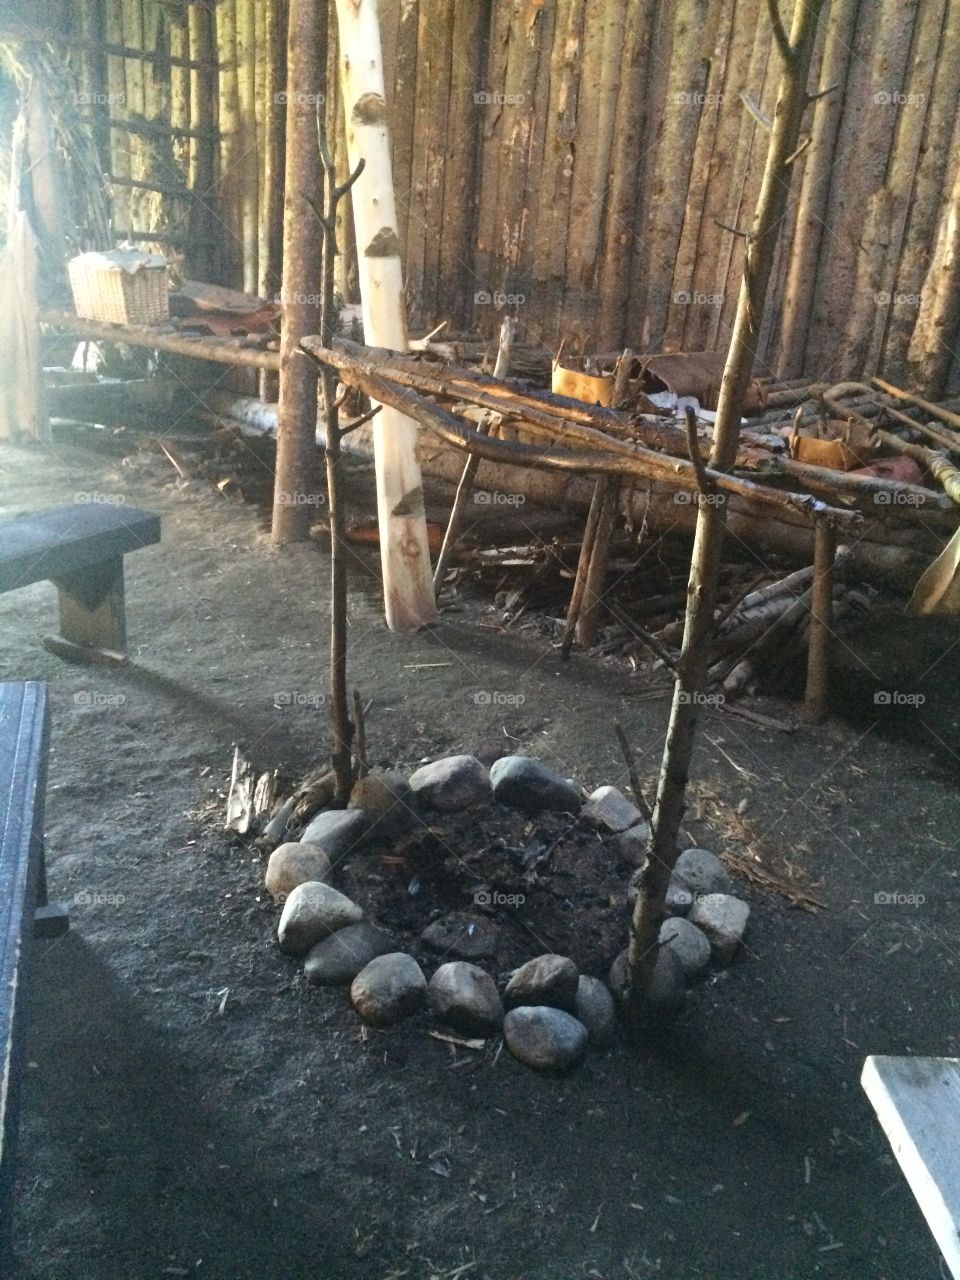 fire, Iroquois house, longhouse, old days, 1500